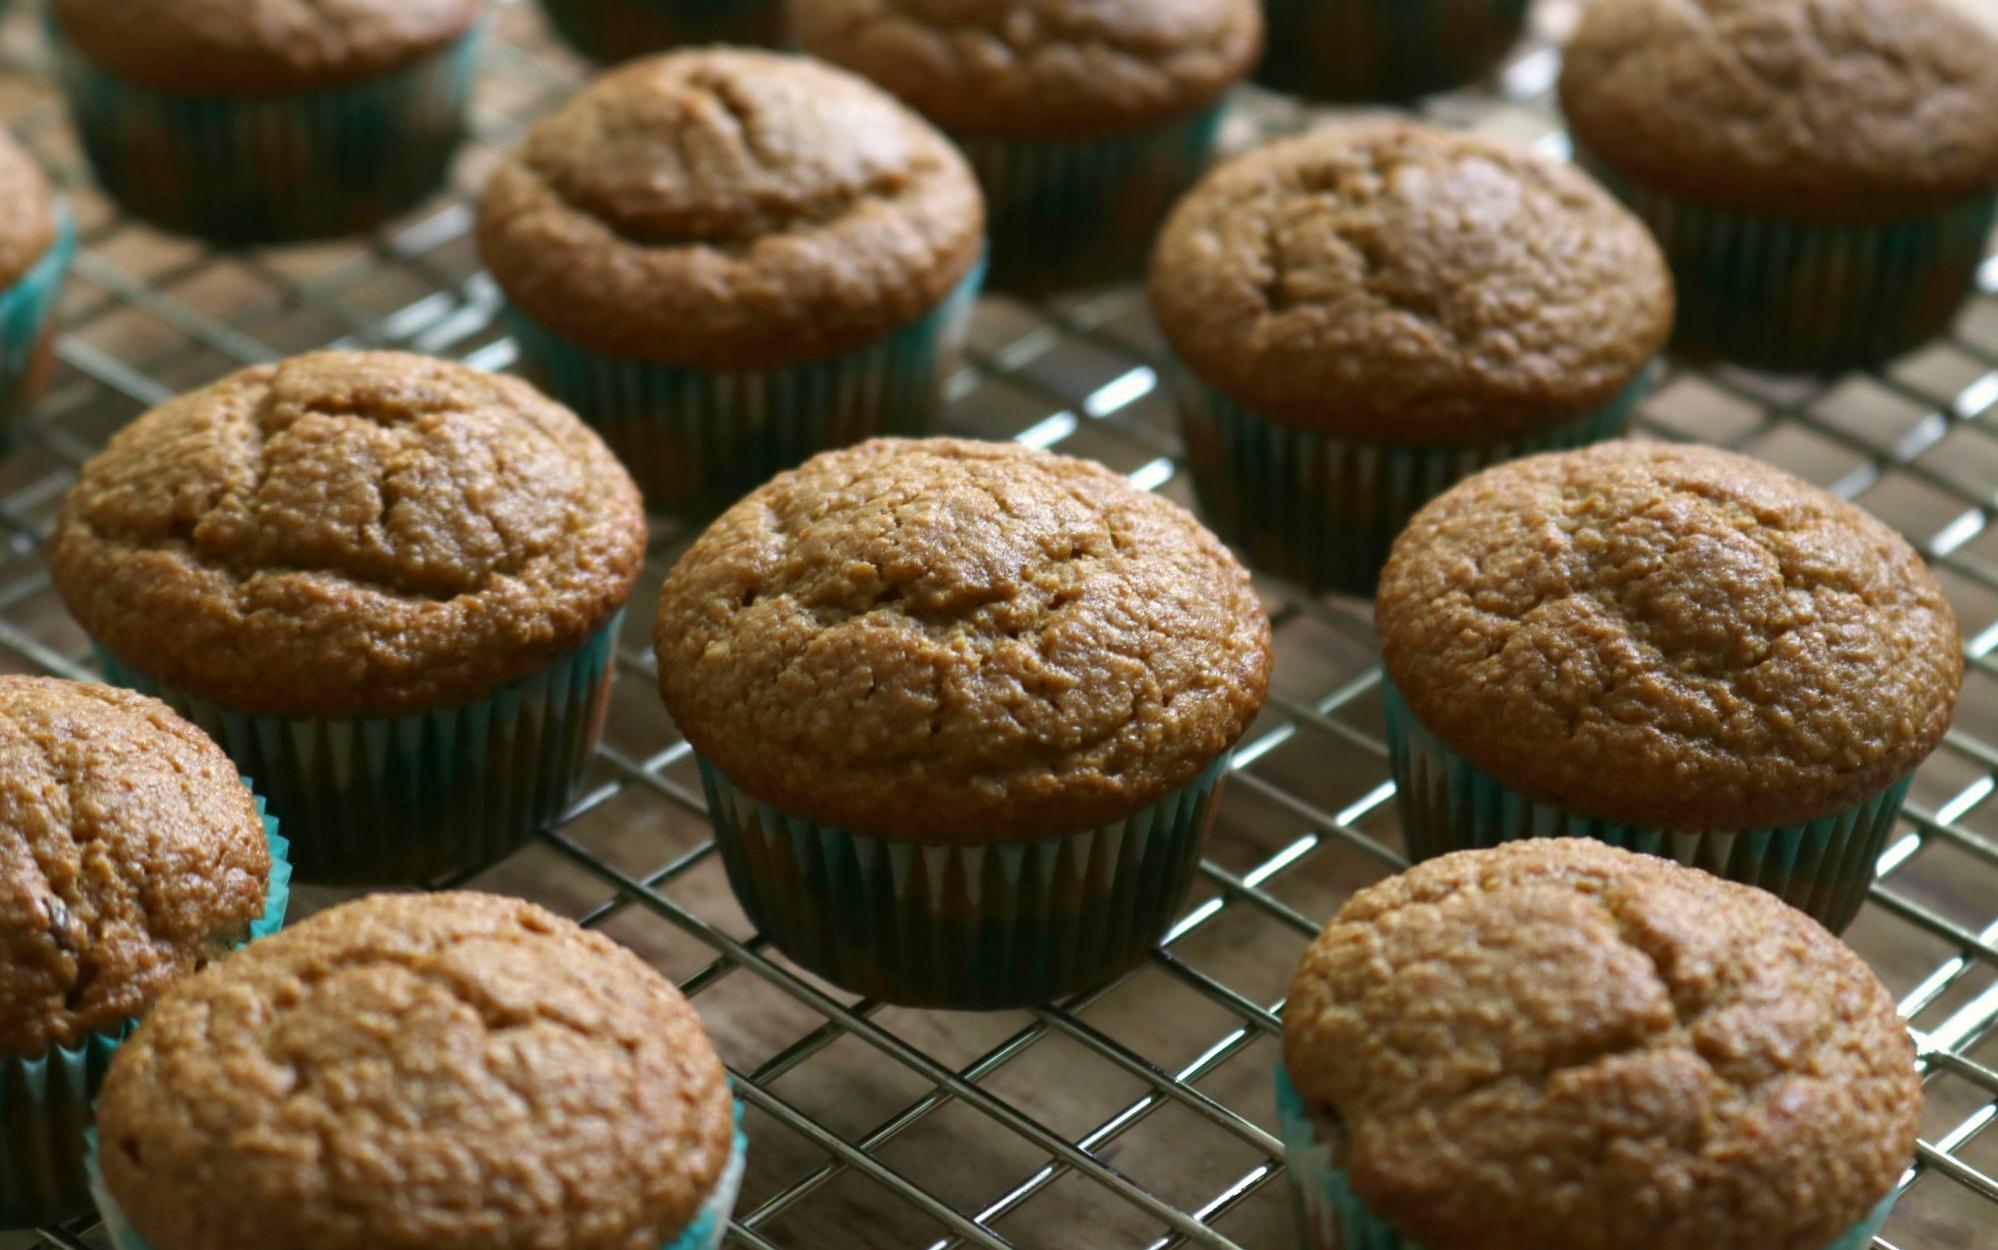  Make gluten-free life easier with our pork and bean muffin recipe.